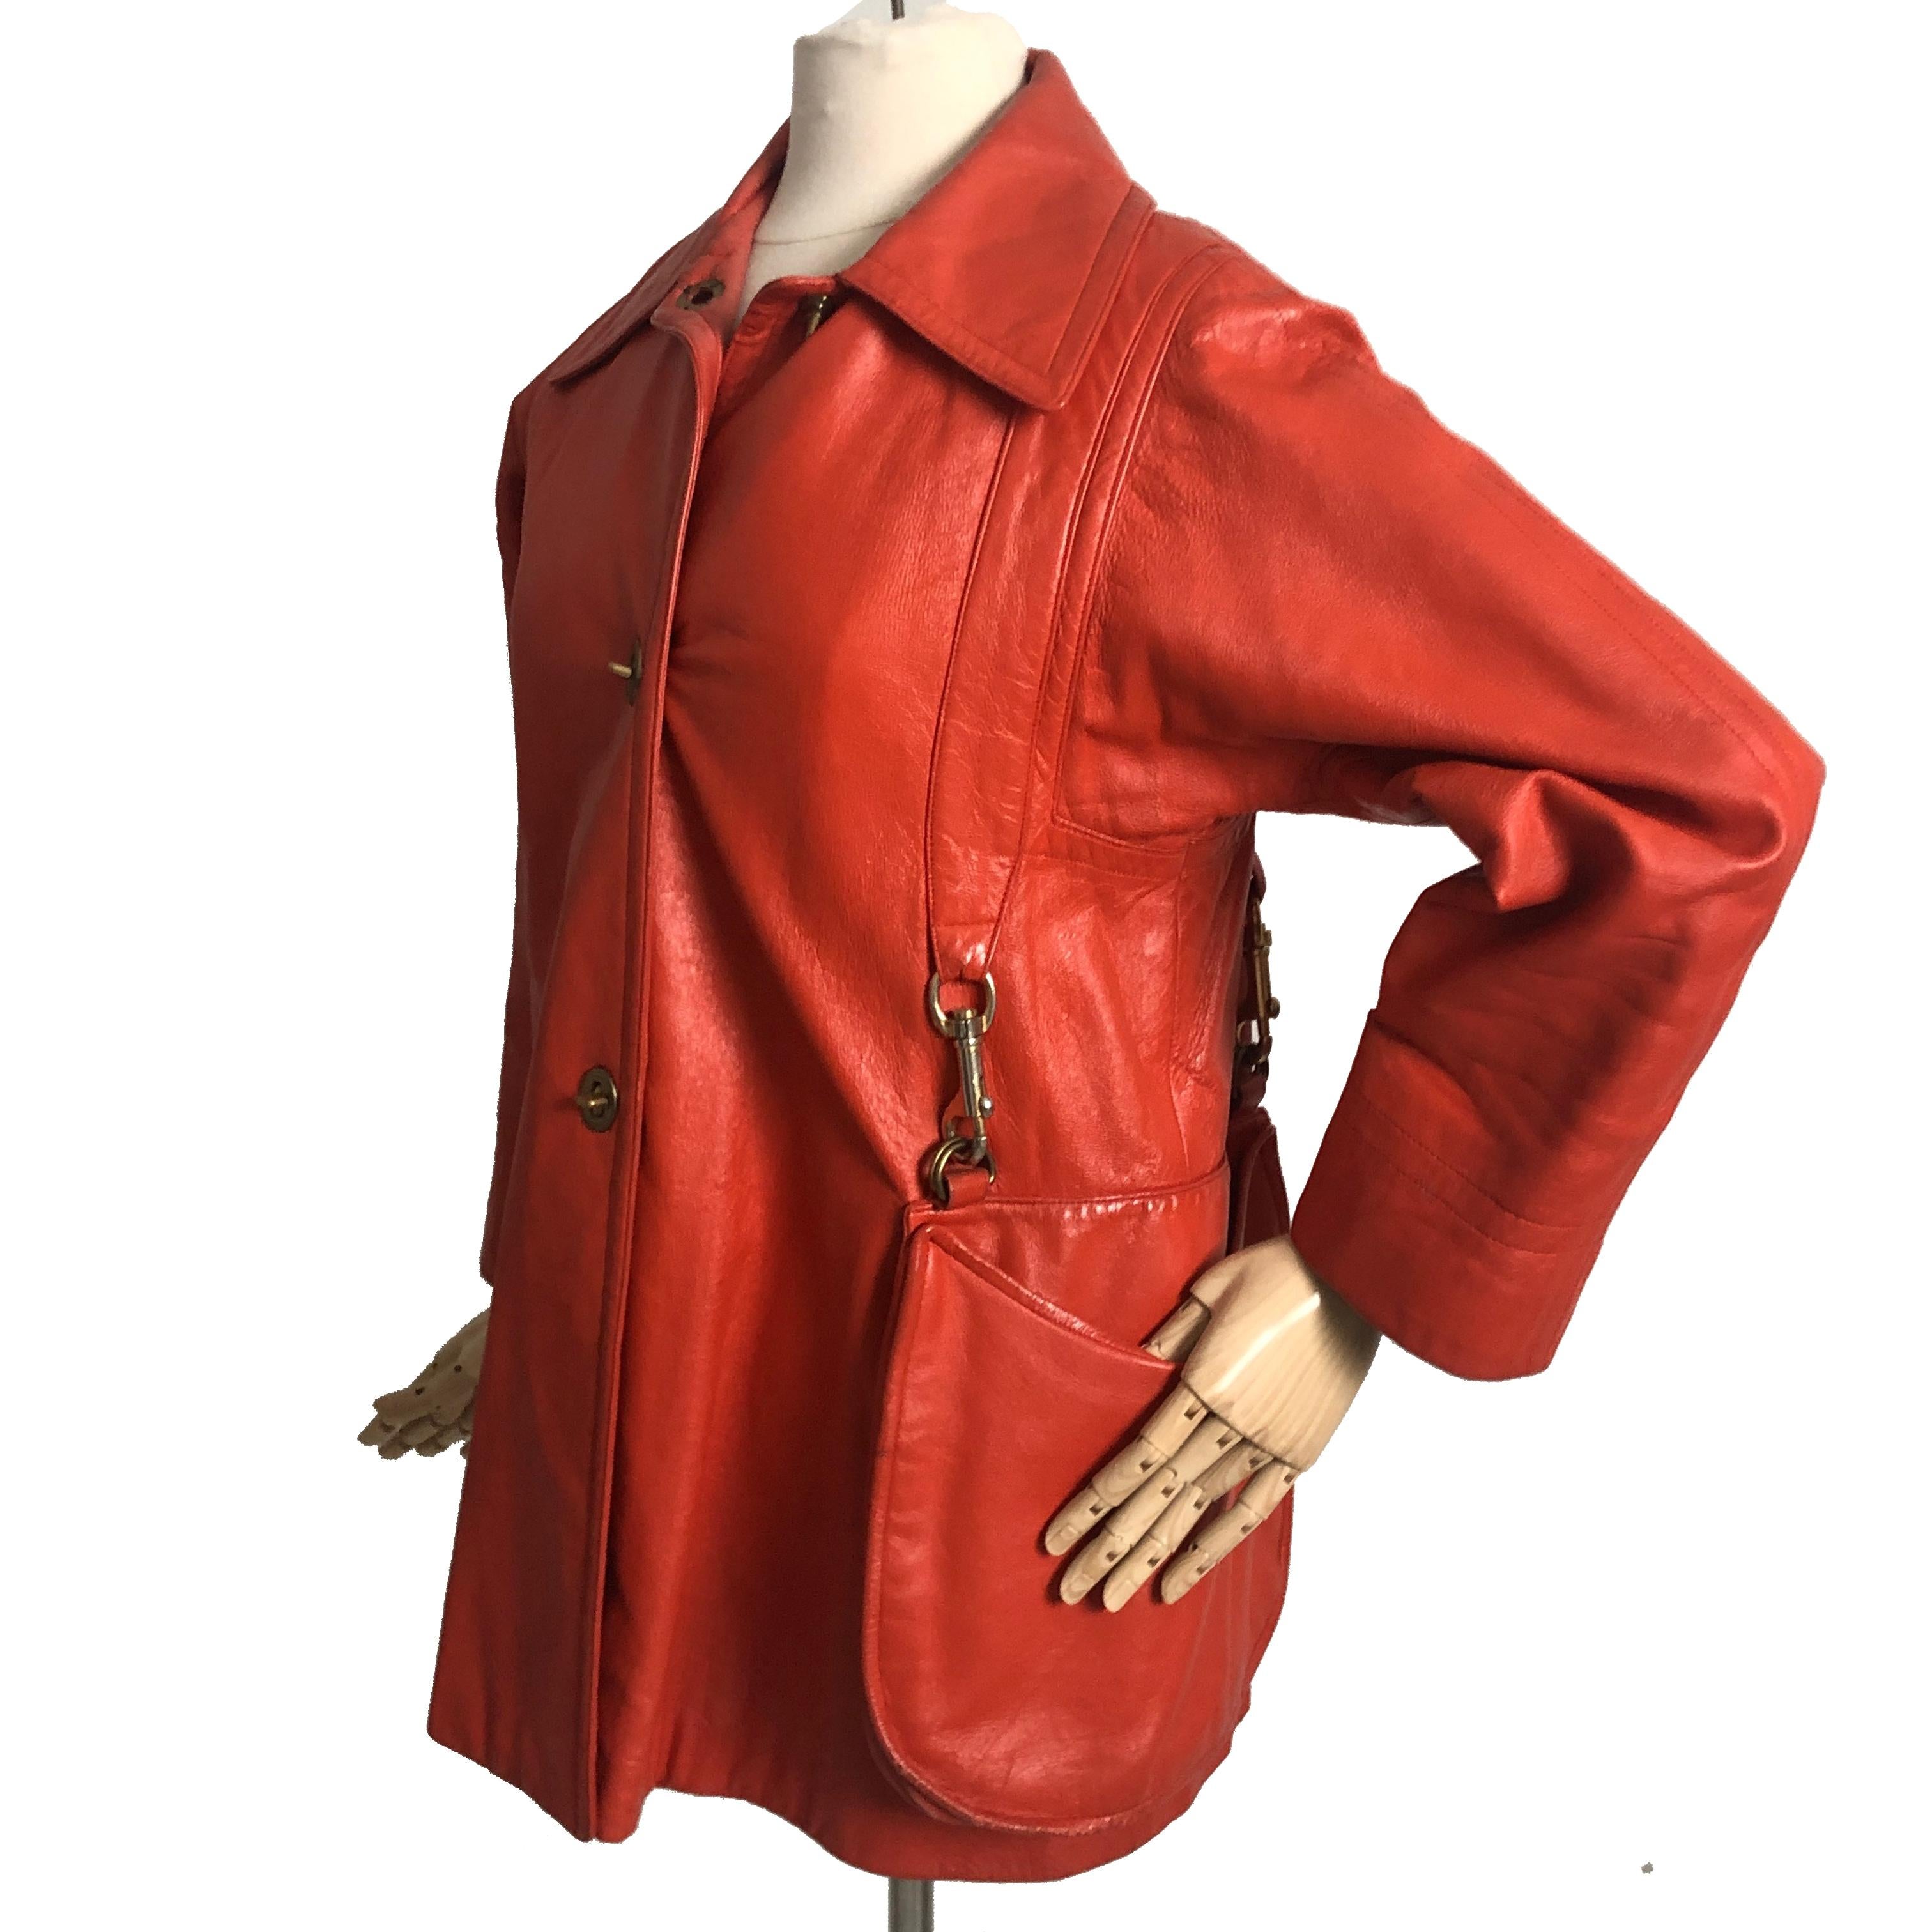 Bonnie Cashin Leather Jacket with Attached Hobo Bag Size S Mod Vintage 60s Rare  For Sale 1